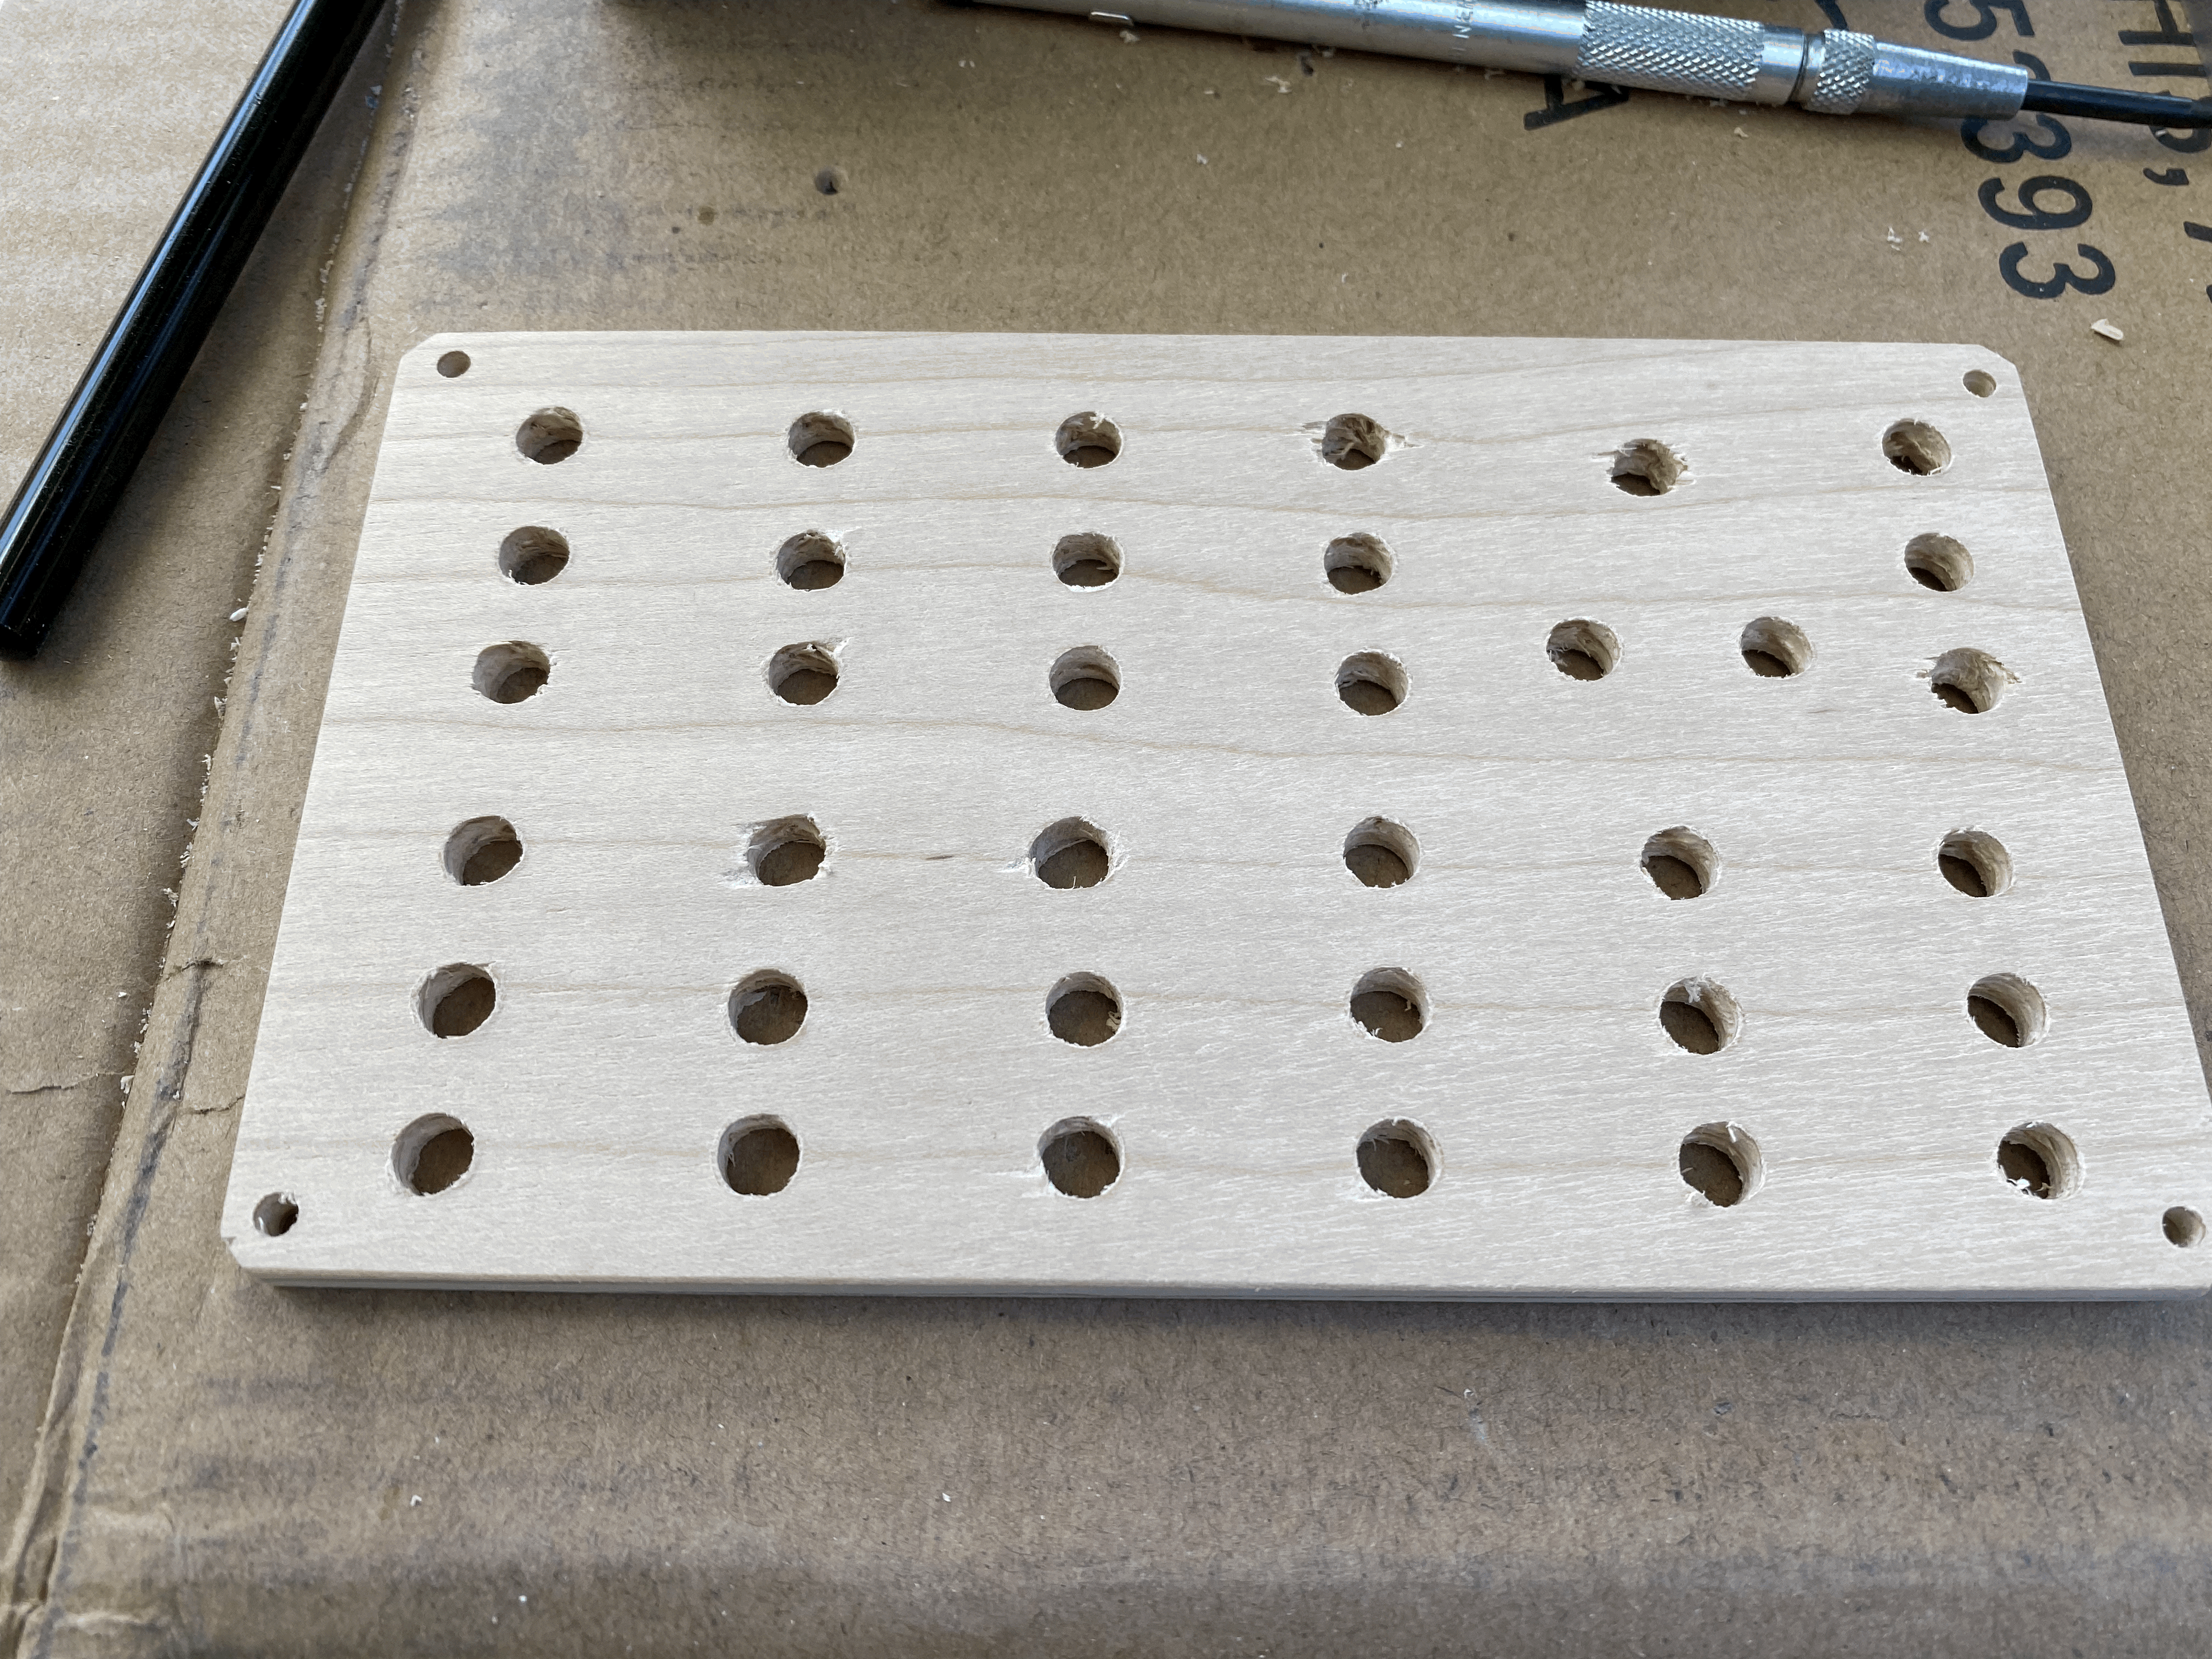 Wooden synthesizer front panel with cleanly-drilled holes for components